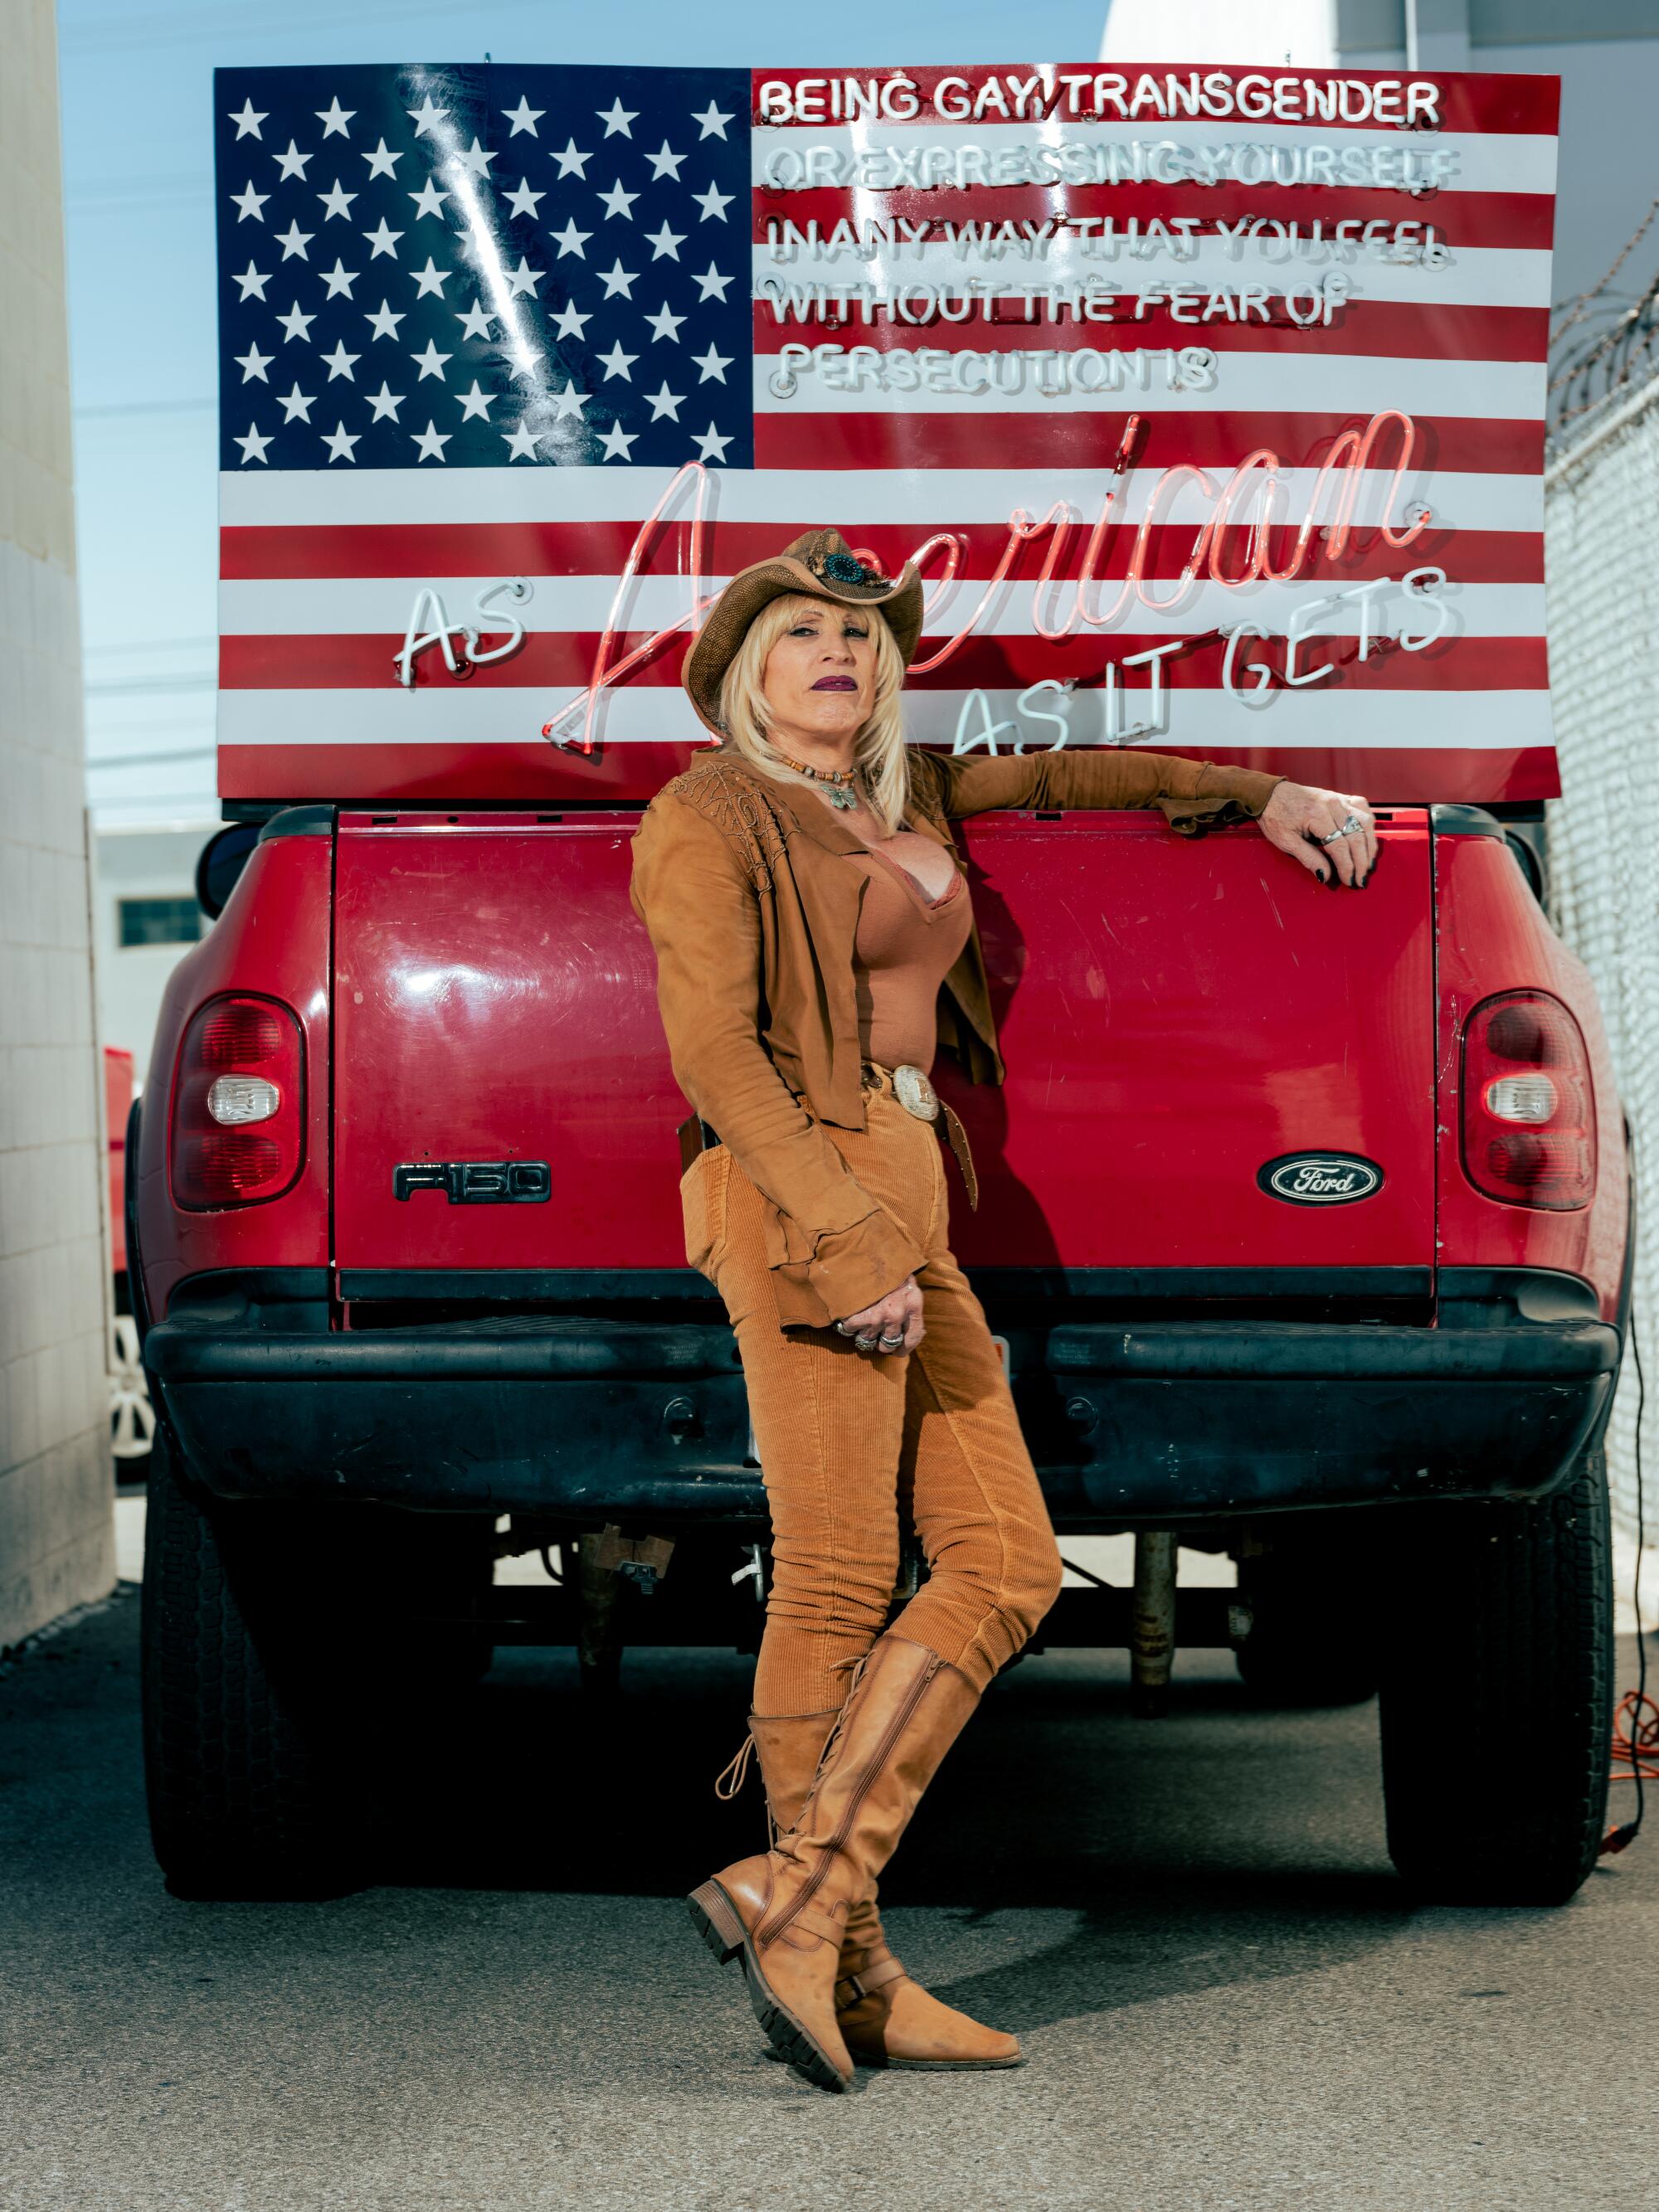 A woman in brown stands in front of a neon art piece incorporating the American flag